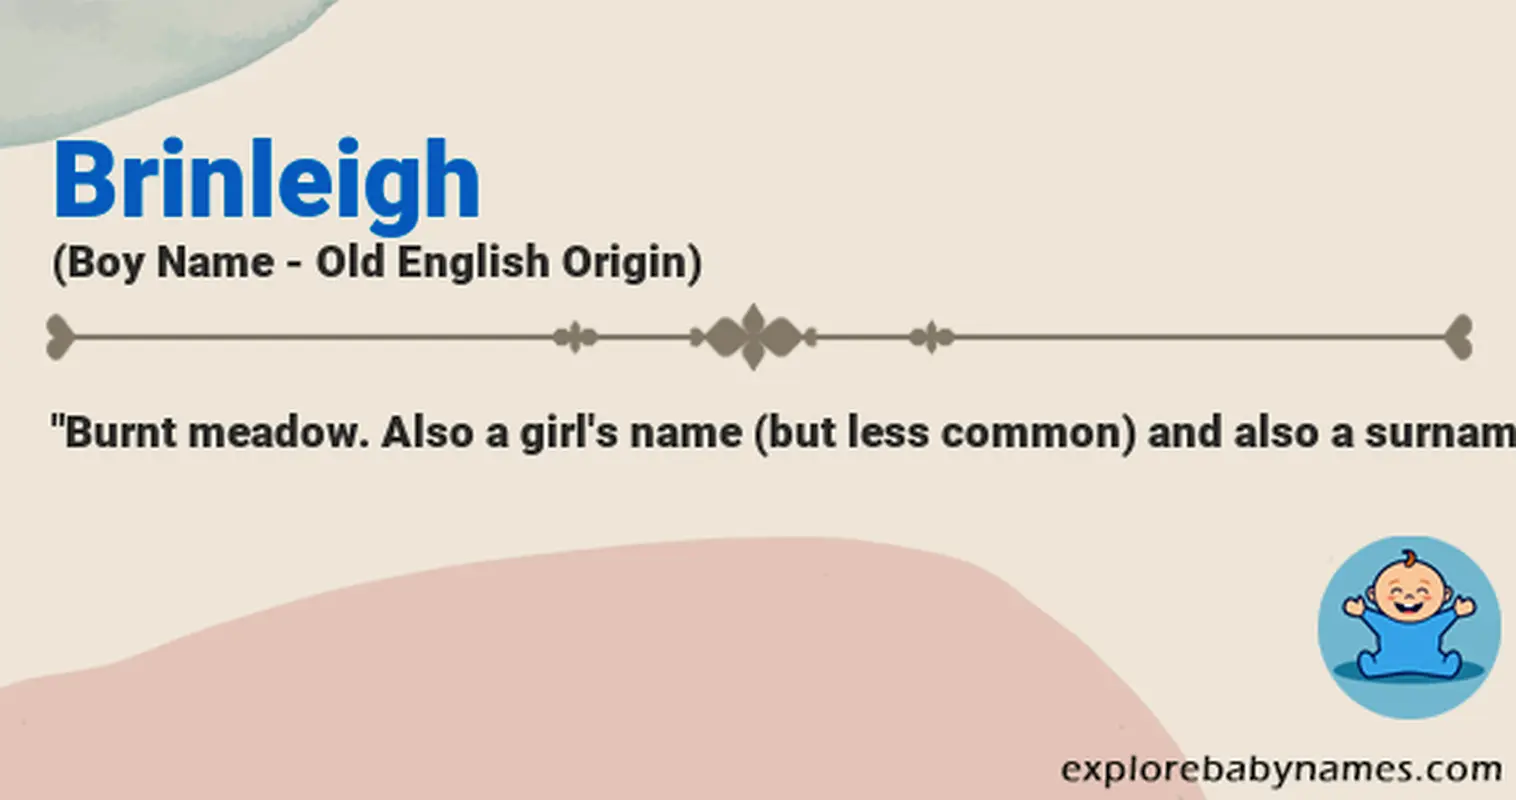 Meaning of Brinleigh